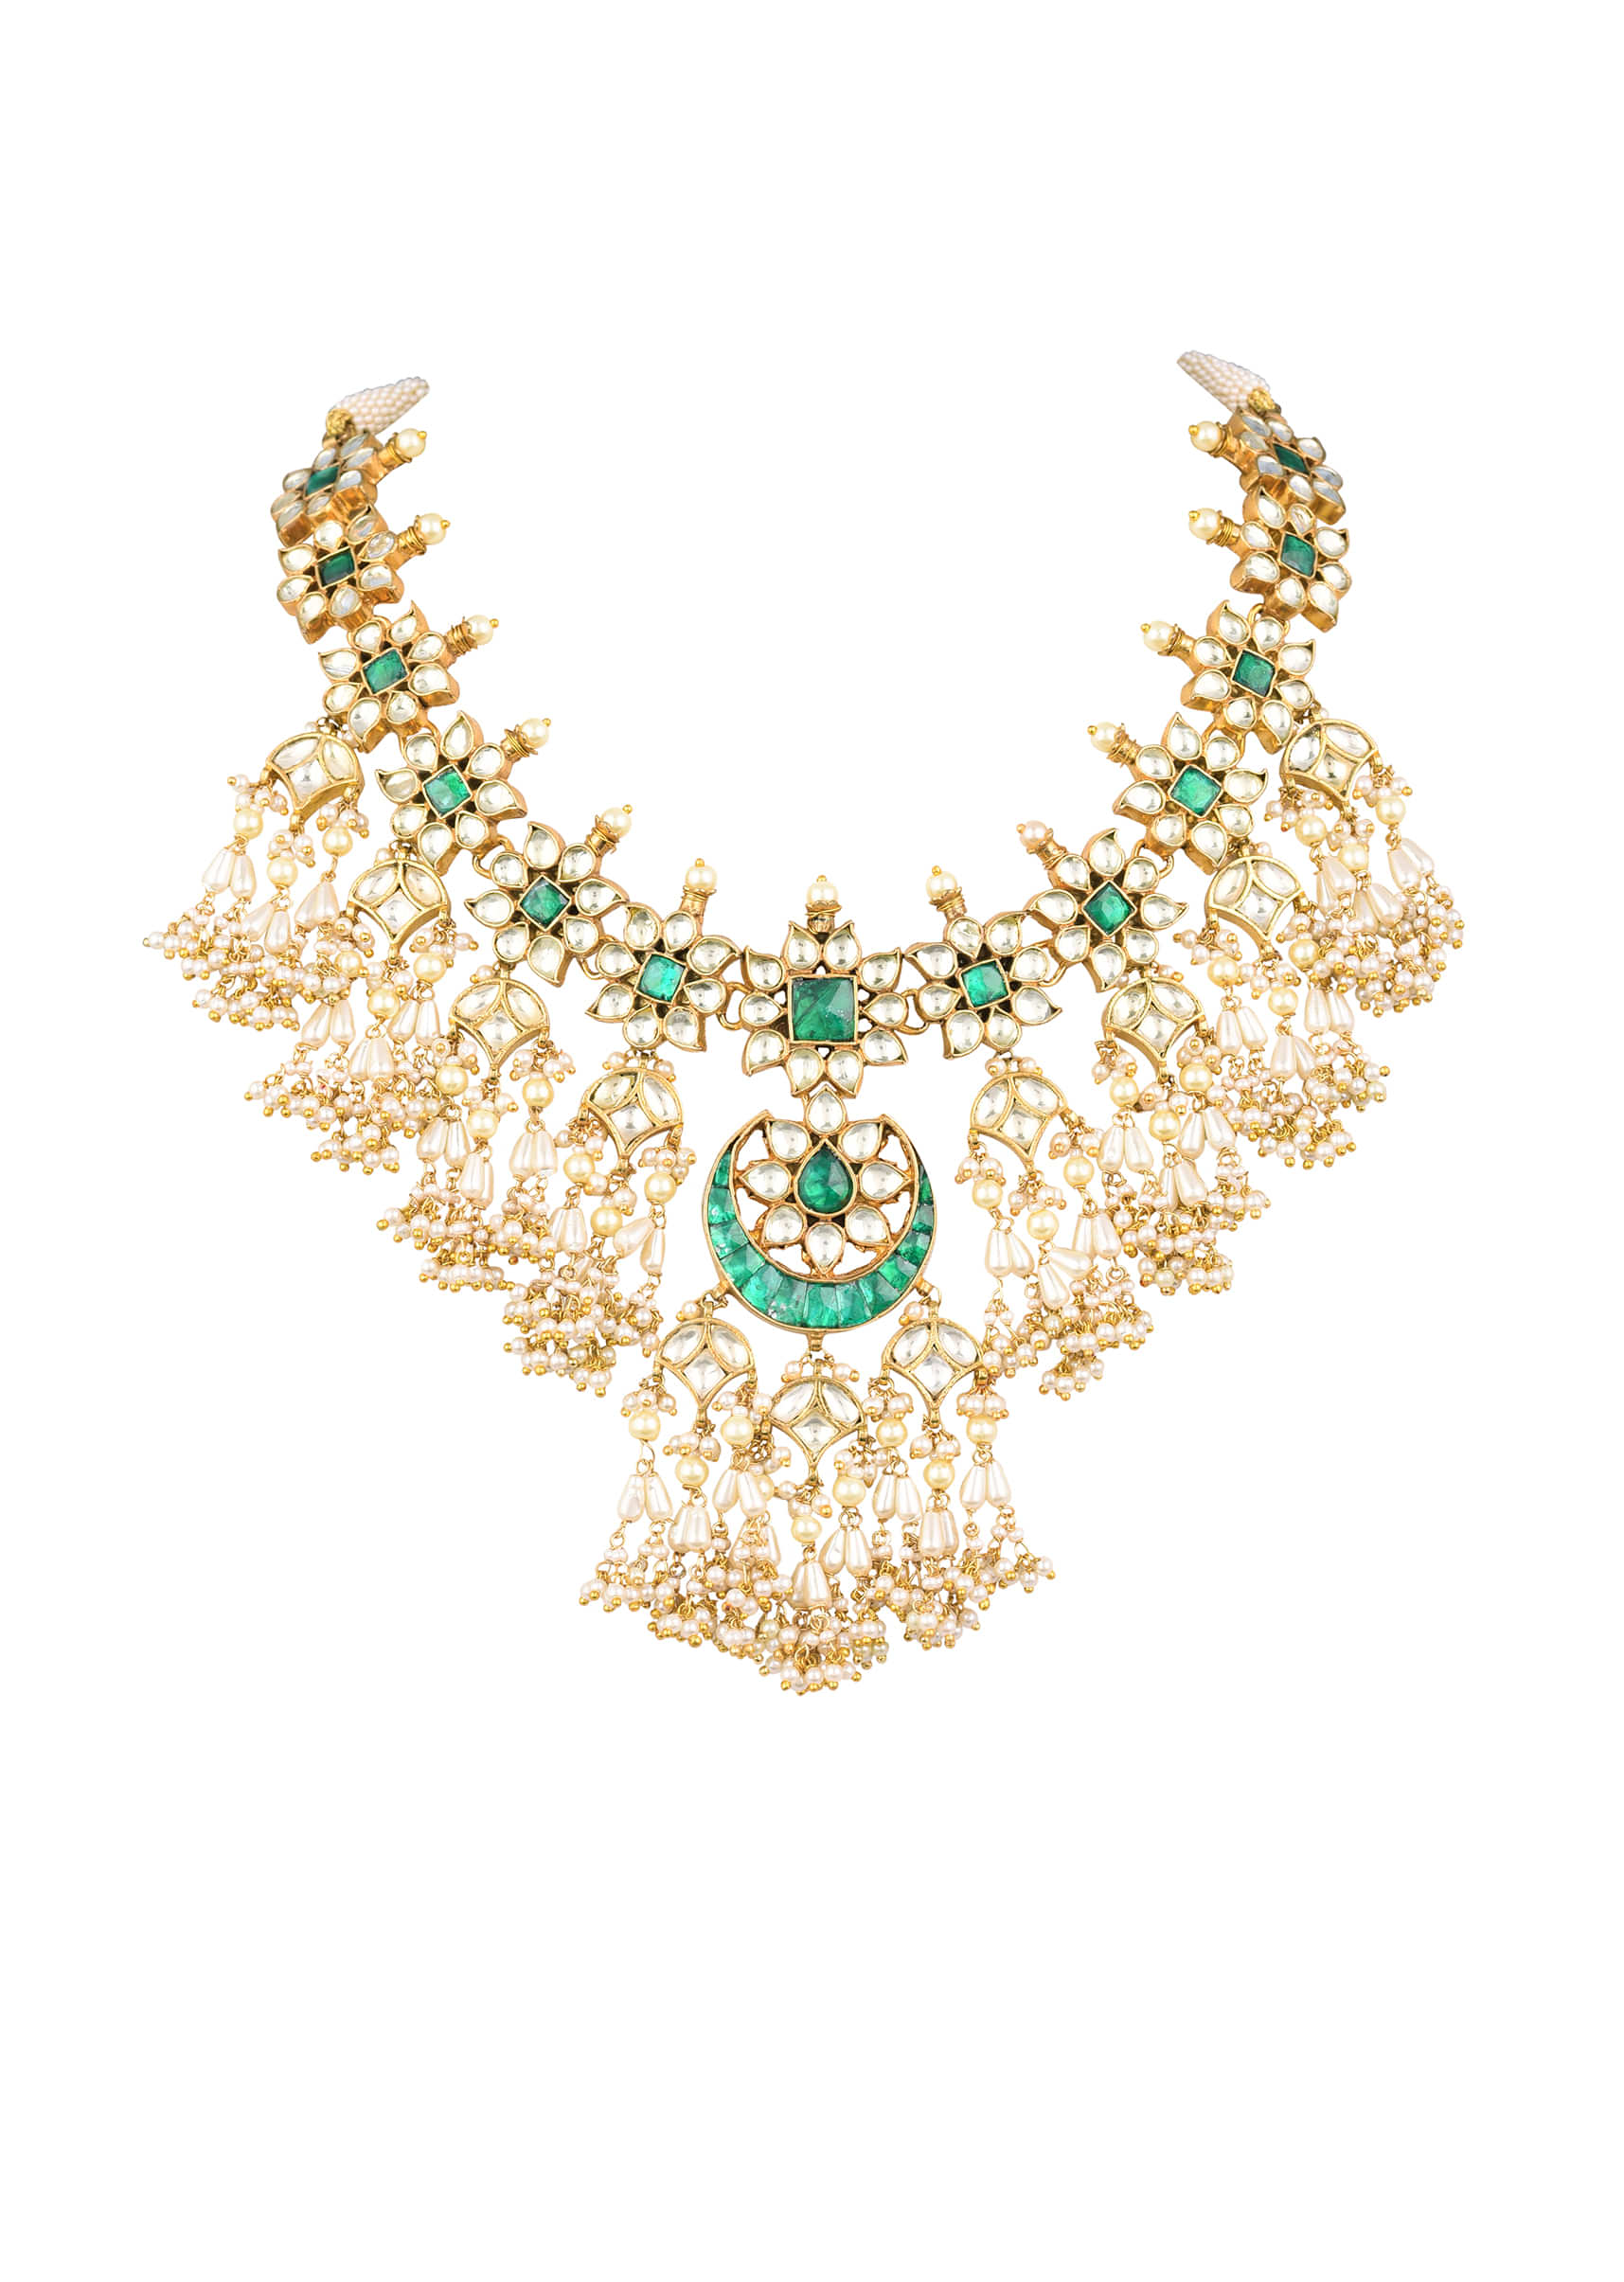 Gold Finish Kundan Necklace Set With Beads, Pearls And Synthetic Emerald Stones